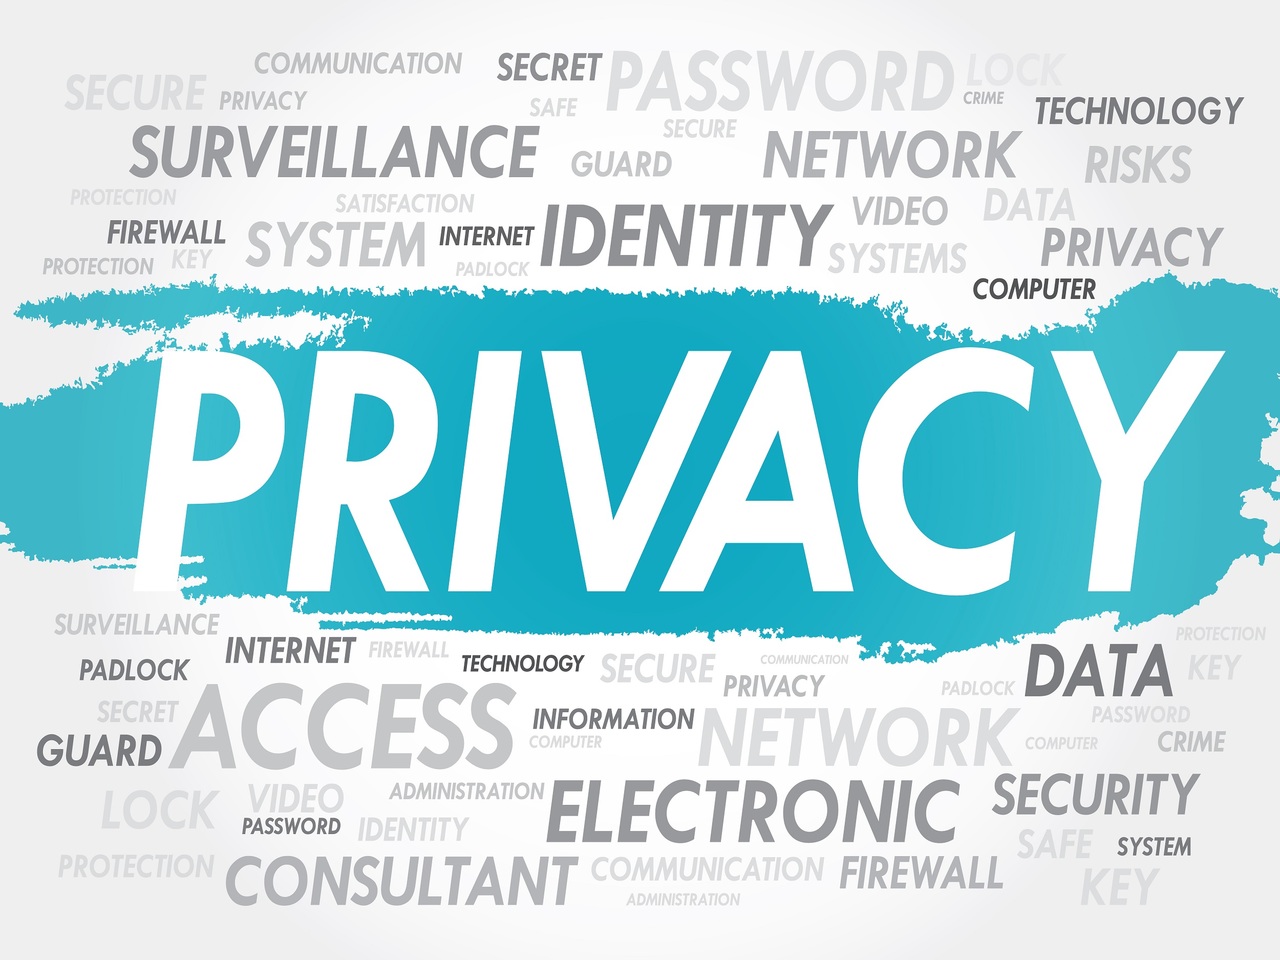 Assessing Privacy Controls